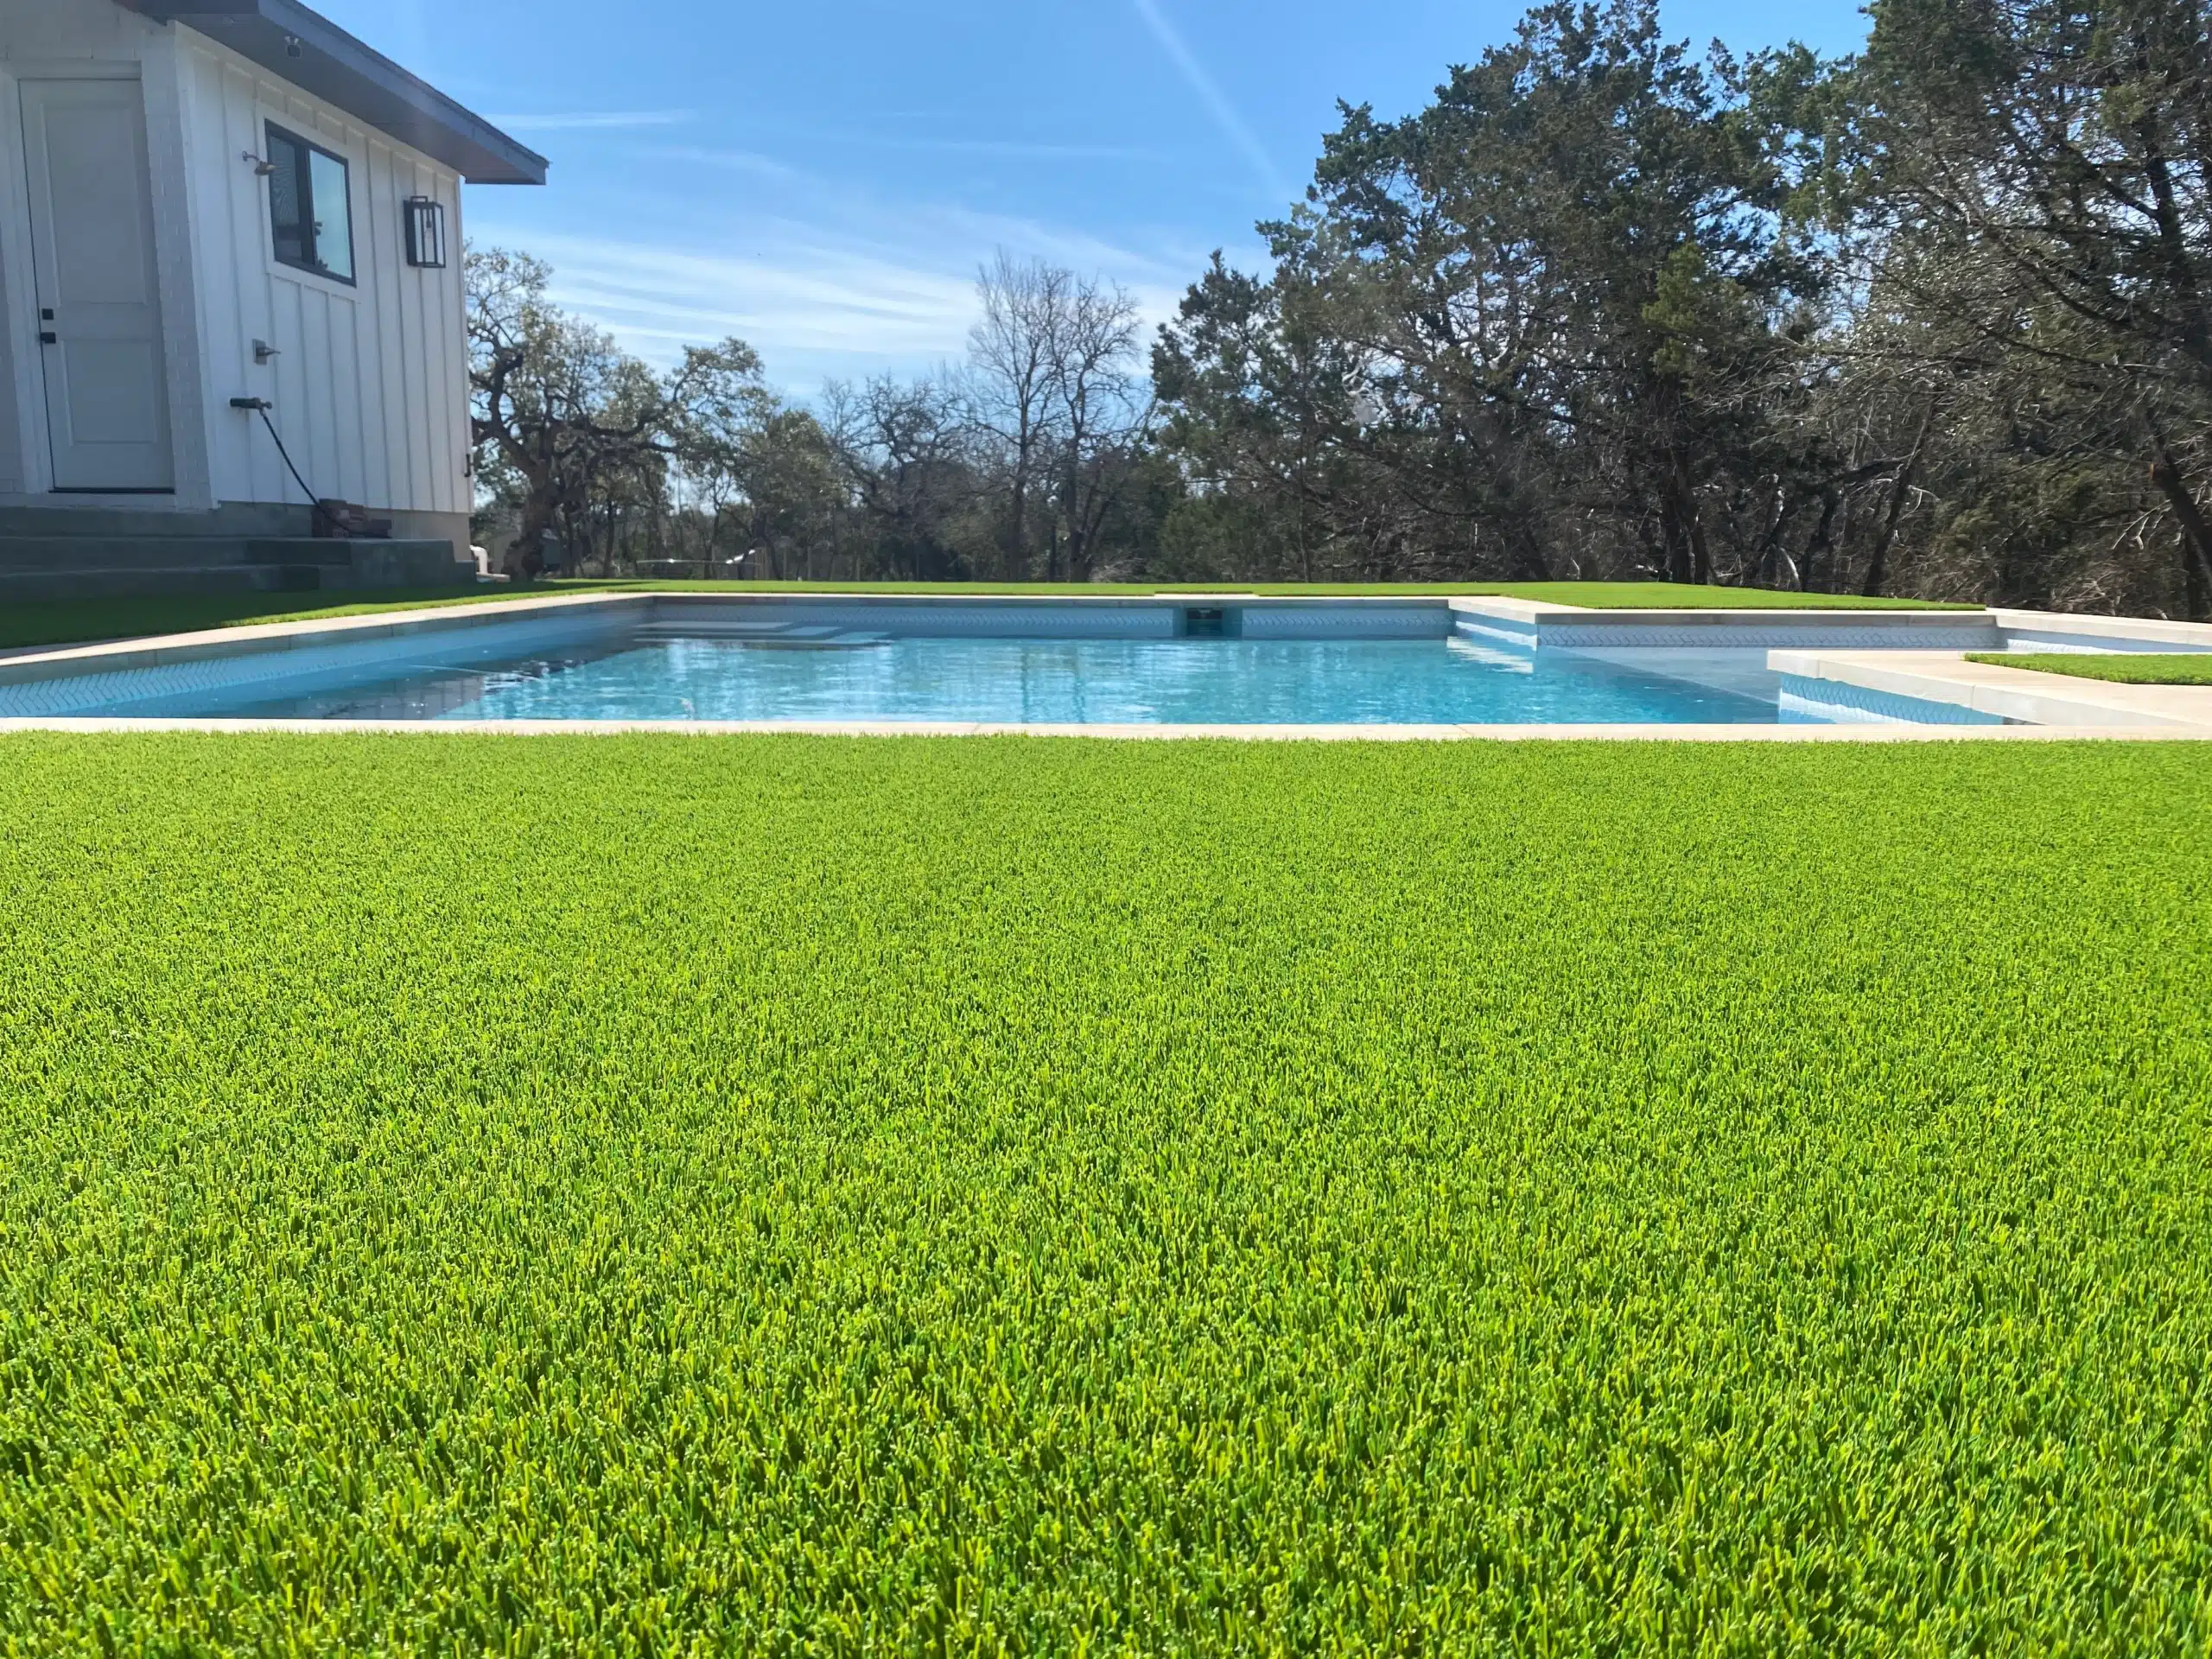 backyard pool surrounded by turf